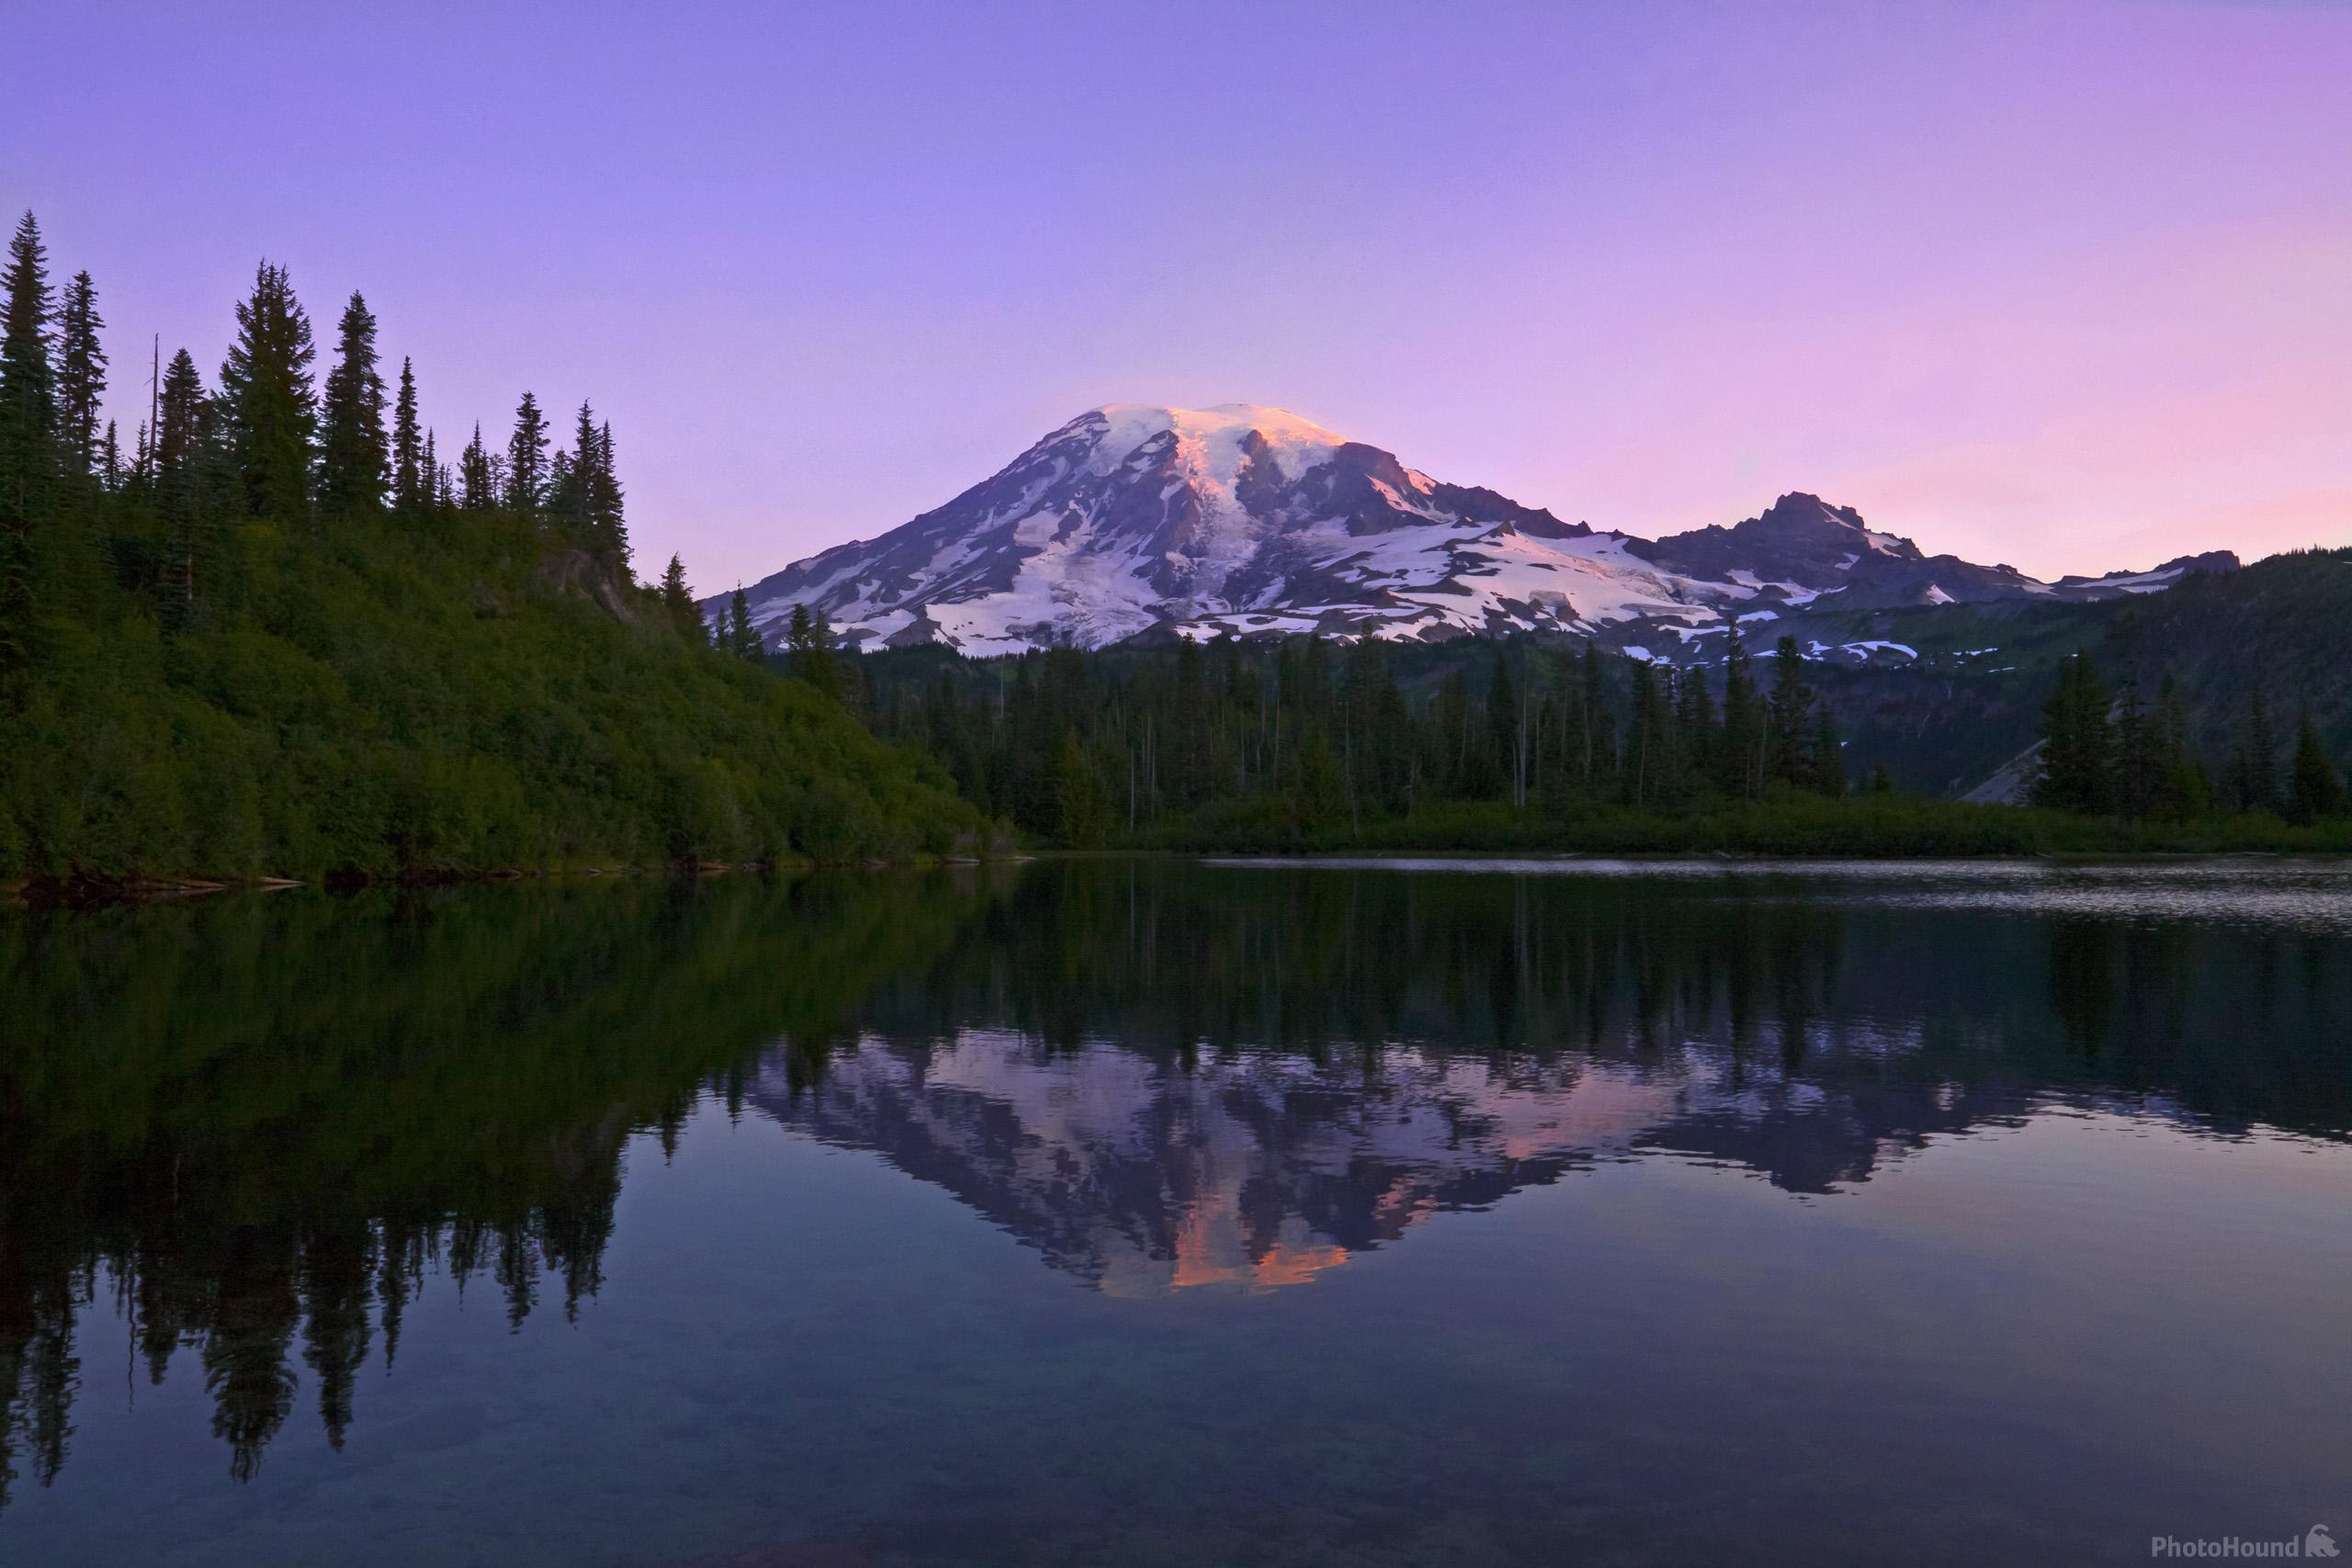 Image of Bench Lake, Mount Rainier National Park by T. Kirkendall and V. Spring